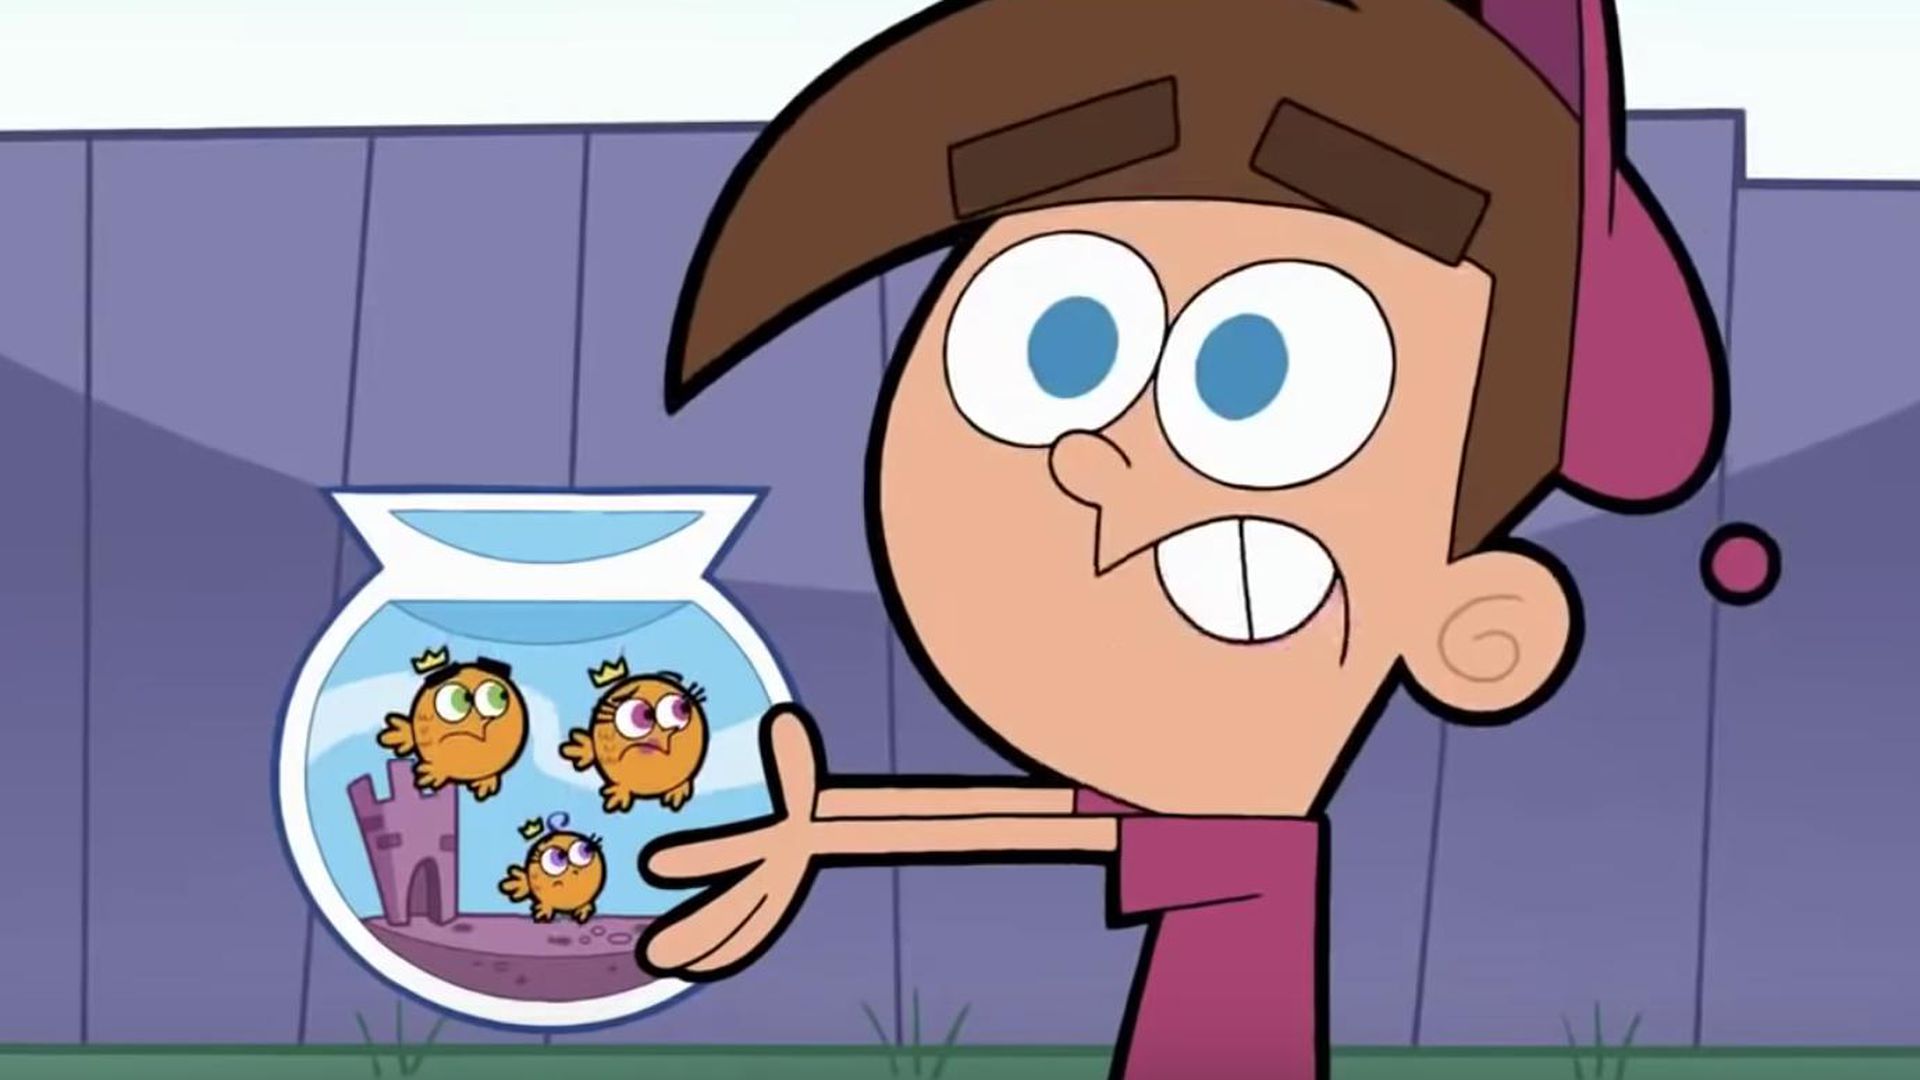 "Wish It, Got It" - Timmy Turner Unlikely Concept.